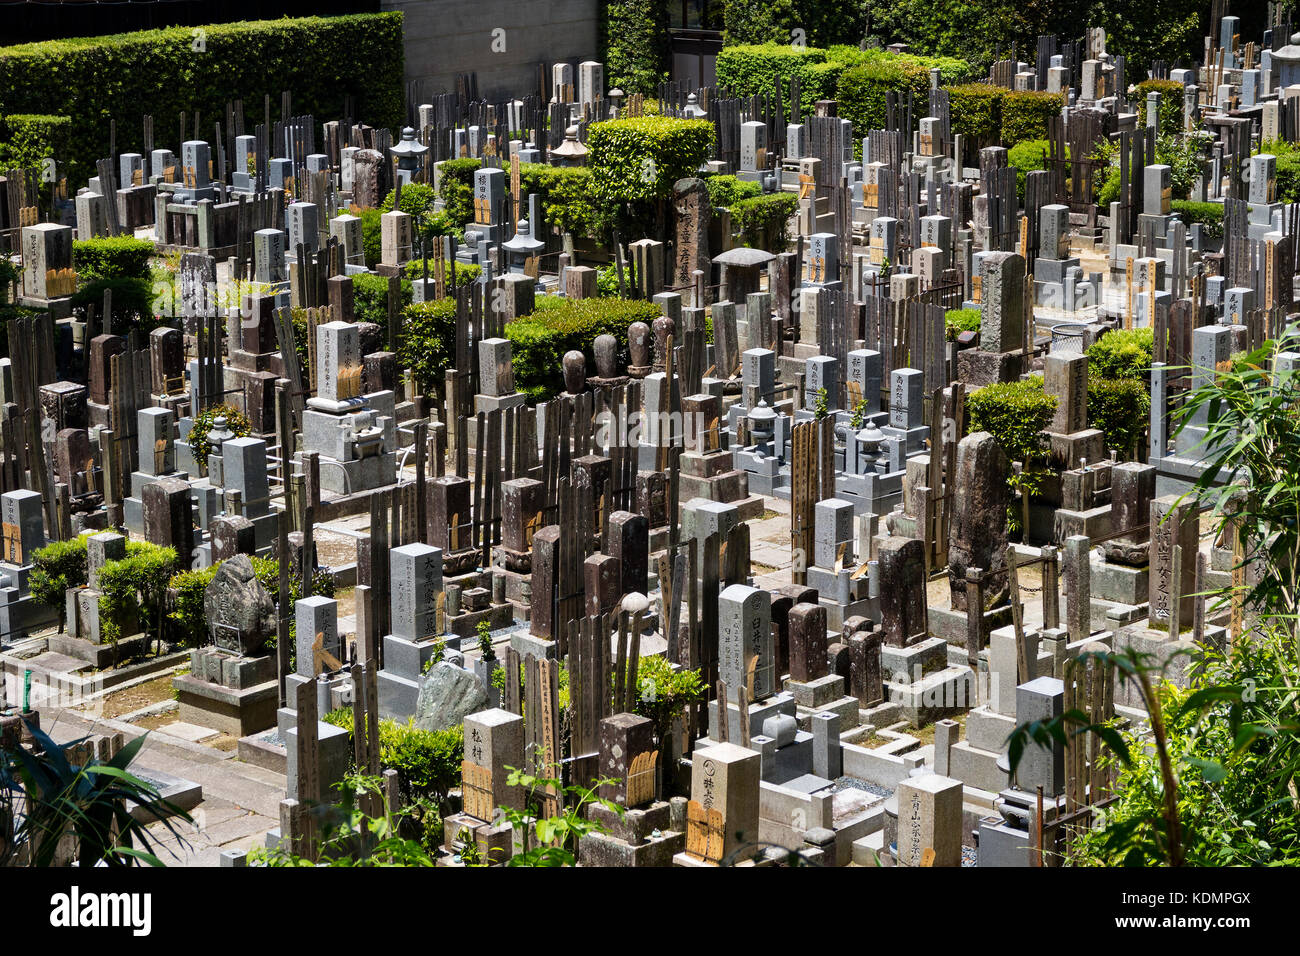 Kyoto, Japan - May 19, 2017: Old graves and headstones of the deceased at a Buddhist cemetery behind Chion-In temple in ancient Kyoto, Japan Stock Photo